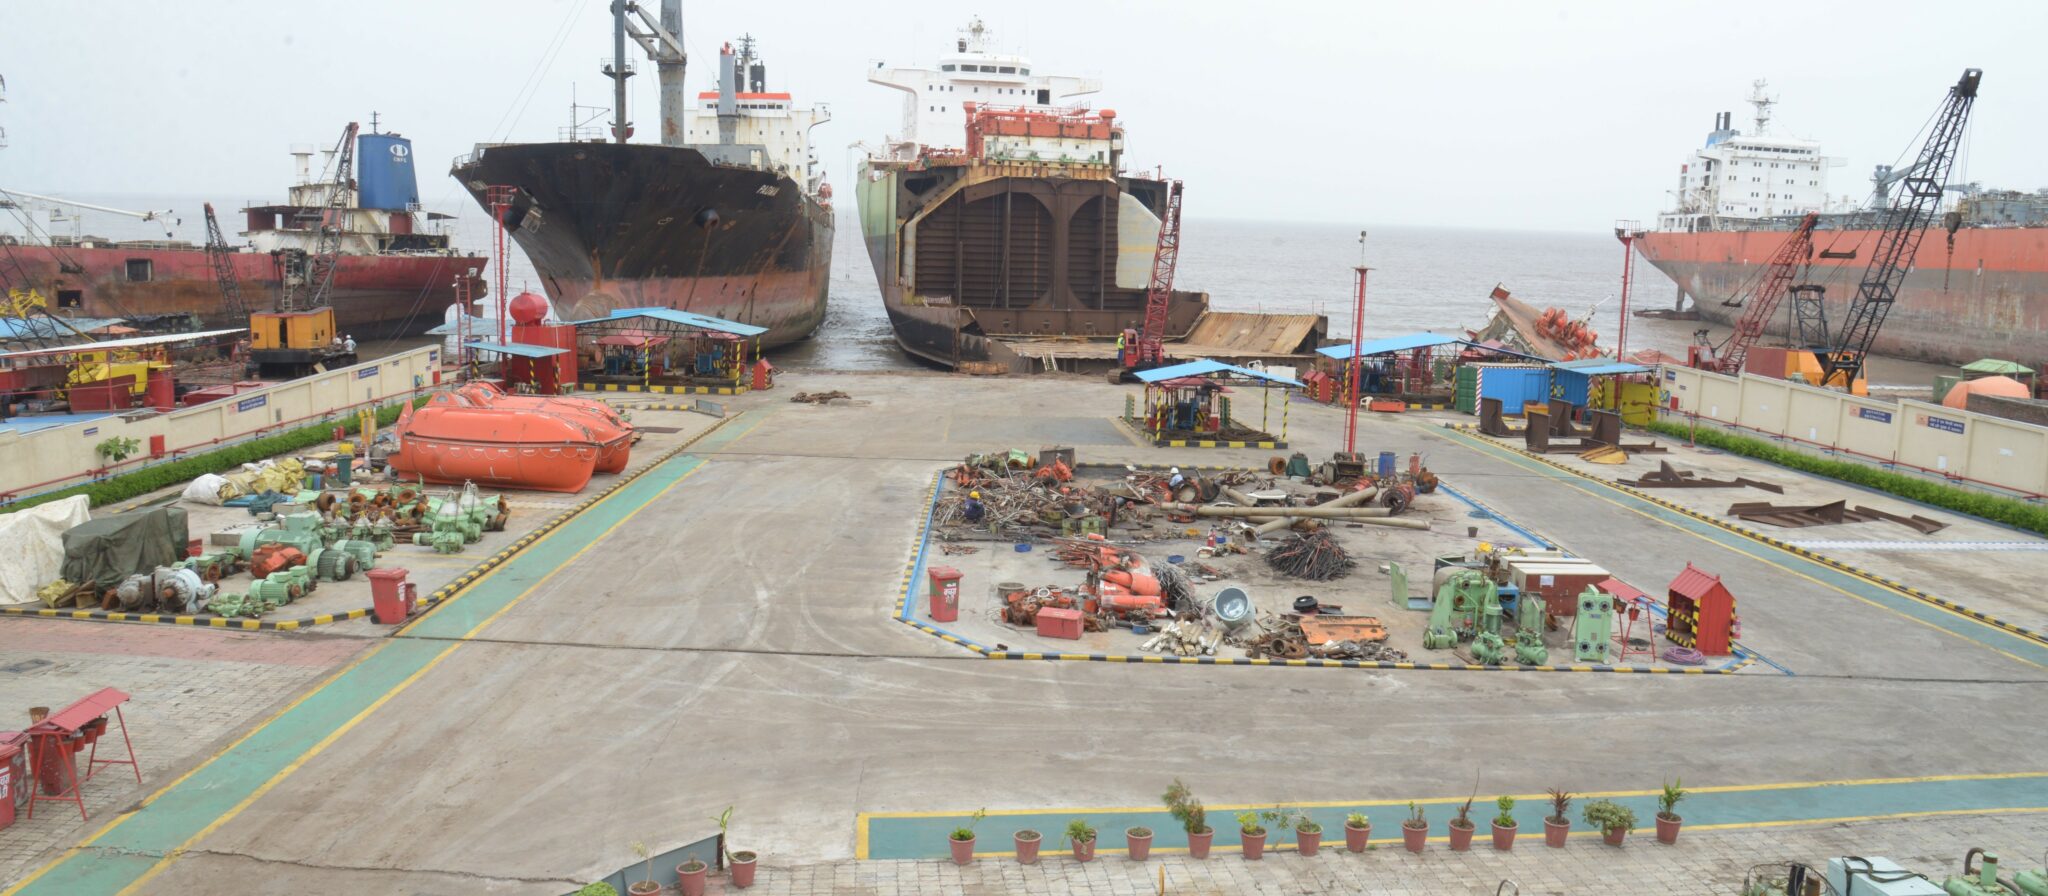 Indian ship recycling sector experienced positive developments